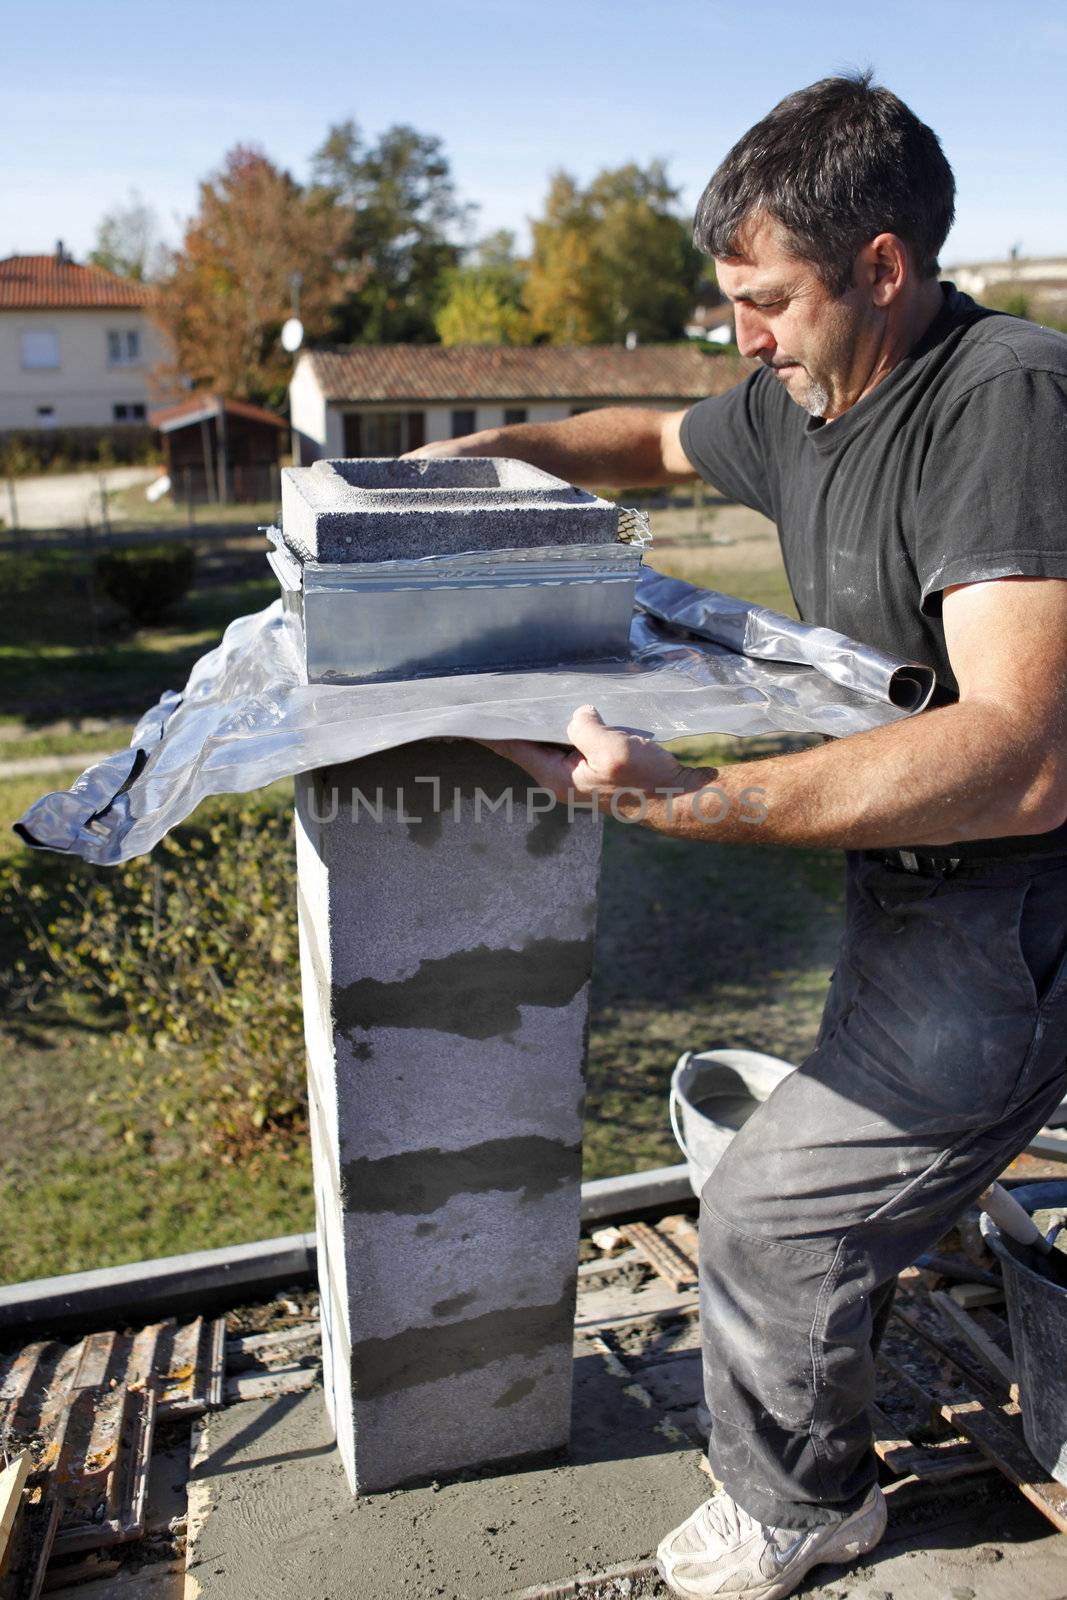 Builder using zinc flashing in the construction of a pillar by phovoir